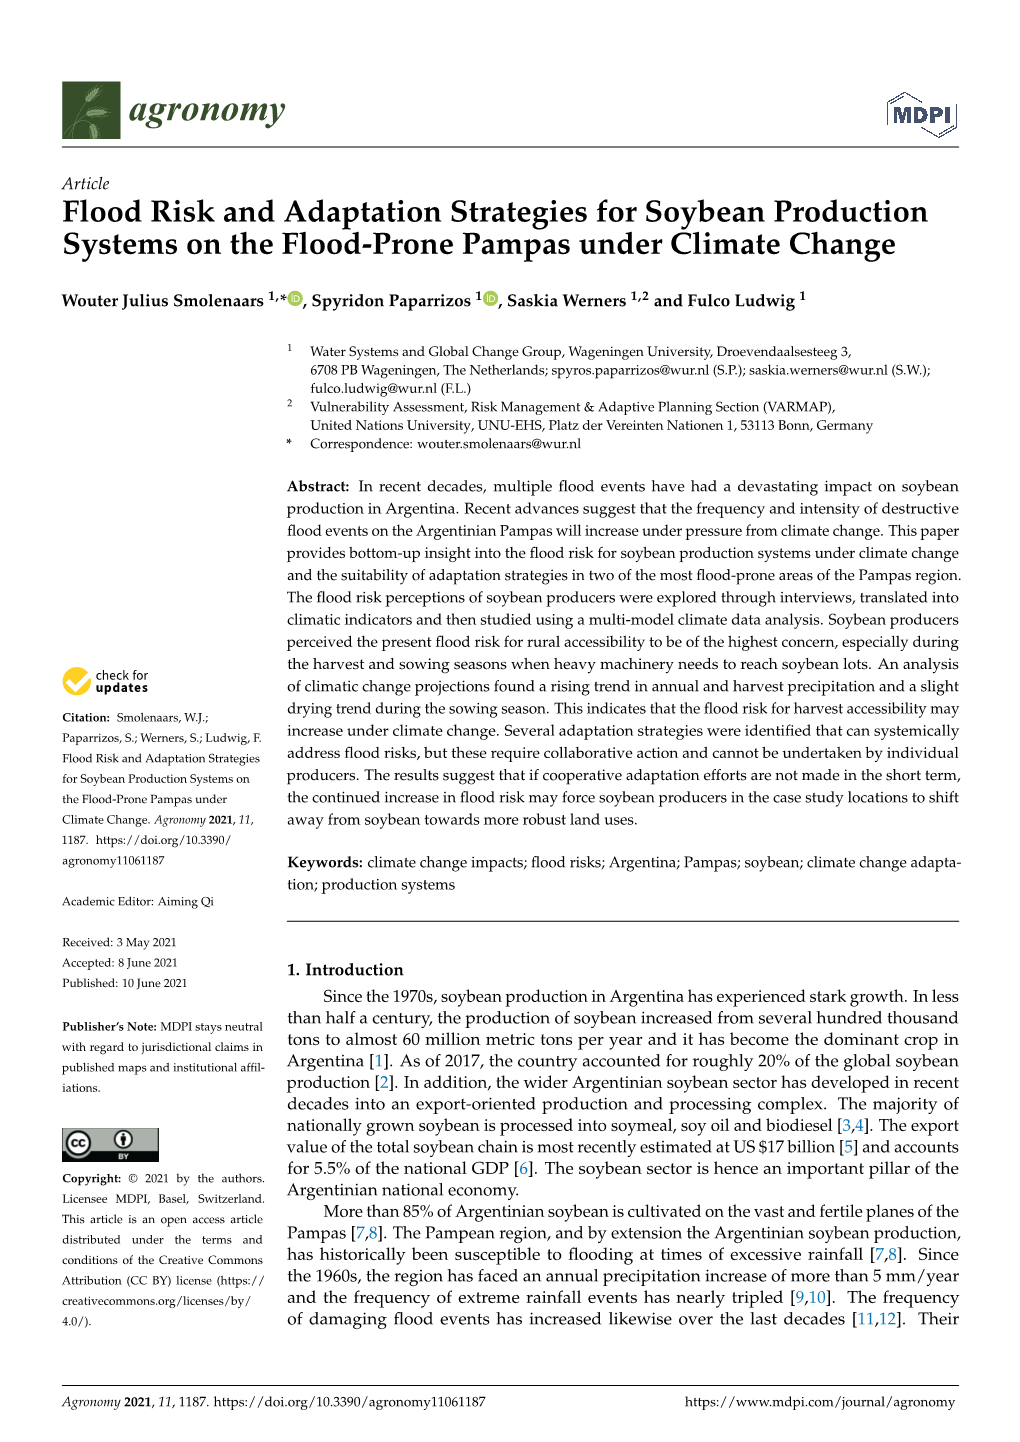 Flood Risk and Adaptation Strategies for Soybean Production Systems on the Flood-Prone Pampas Under Climate Change